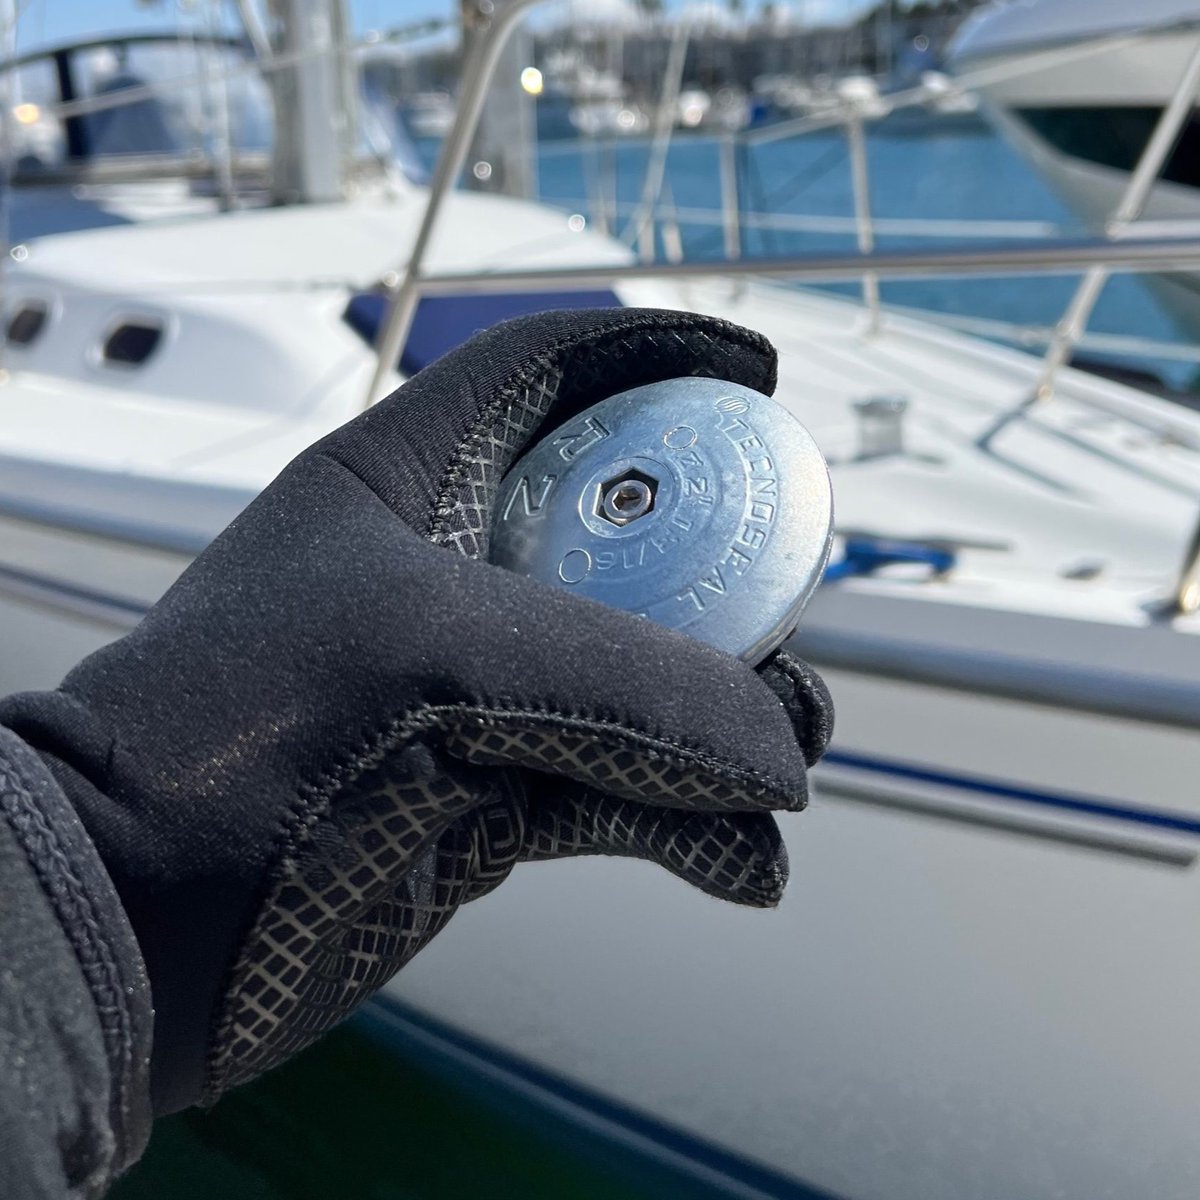 Cal Boat effectively provides underwater hull cleaning services, extending from the waterline to the keel.

We also give inspection & replacement on worn/missing zincs as needed.

#CalBoat #HullCleaning #HullCare #RedondoBeach #SanPedro
#BoaterProblems #BoatMaintenance